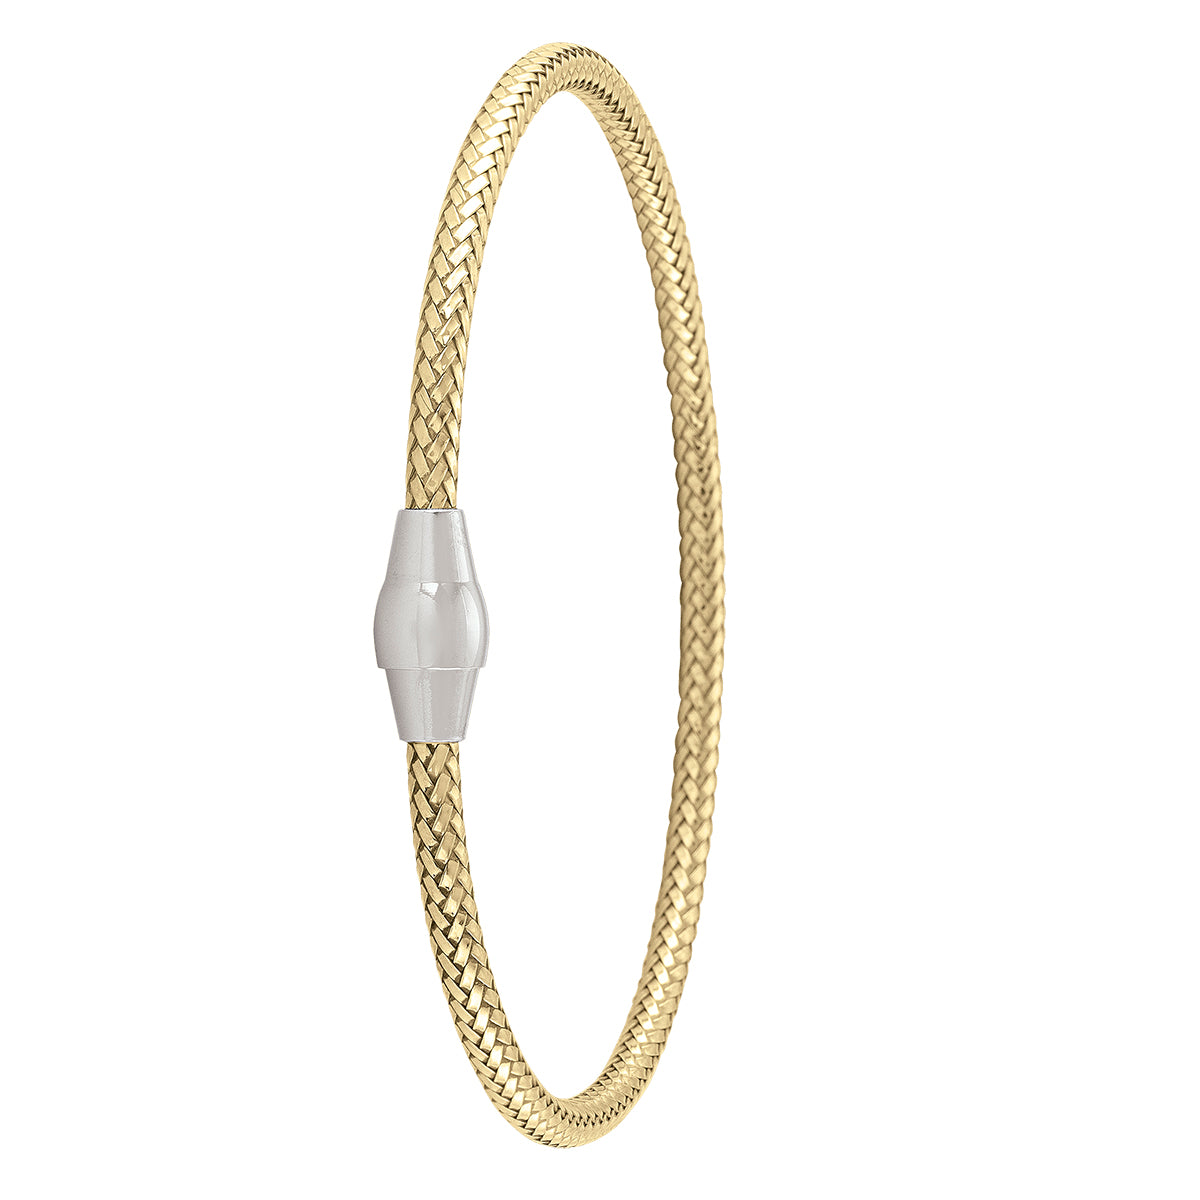 STERLING SILVER YELLOW GOLD PLATED MAGNETIC CLASP BANGLE